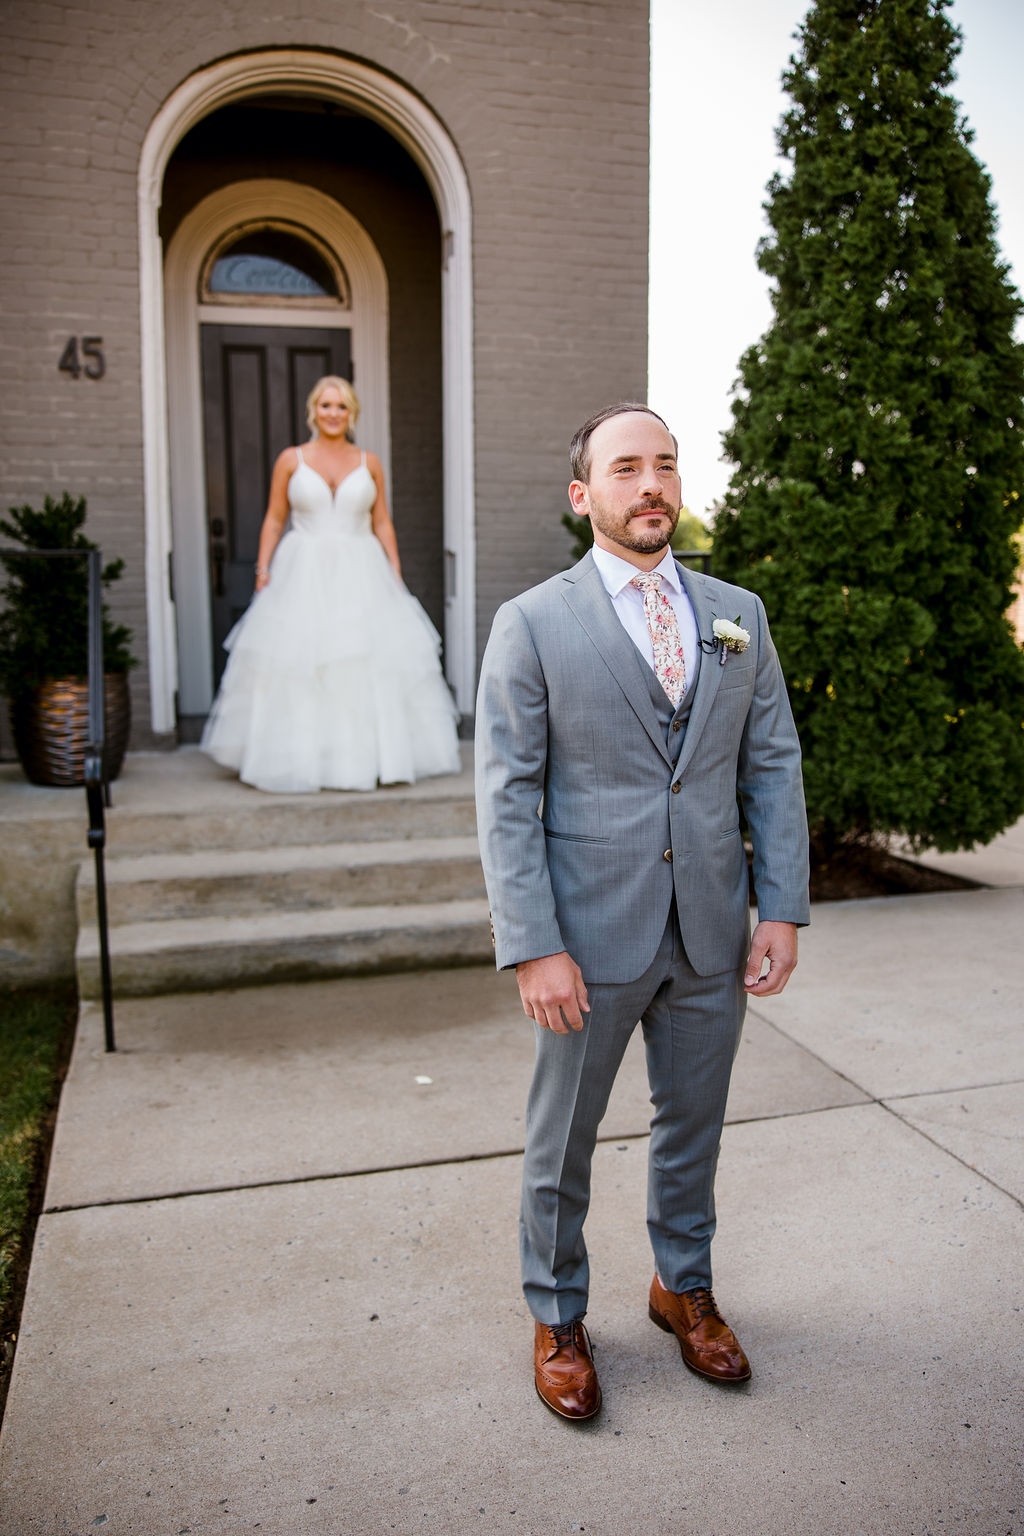 Wedding first look at The Cordelle | Nashville Bride Guide